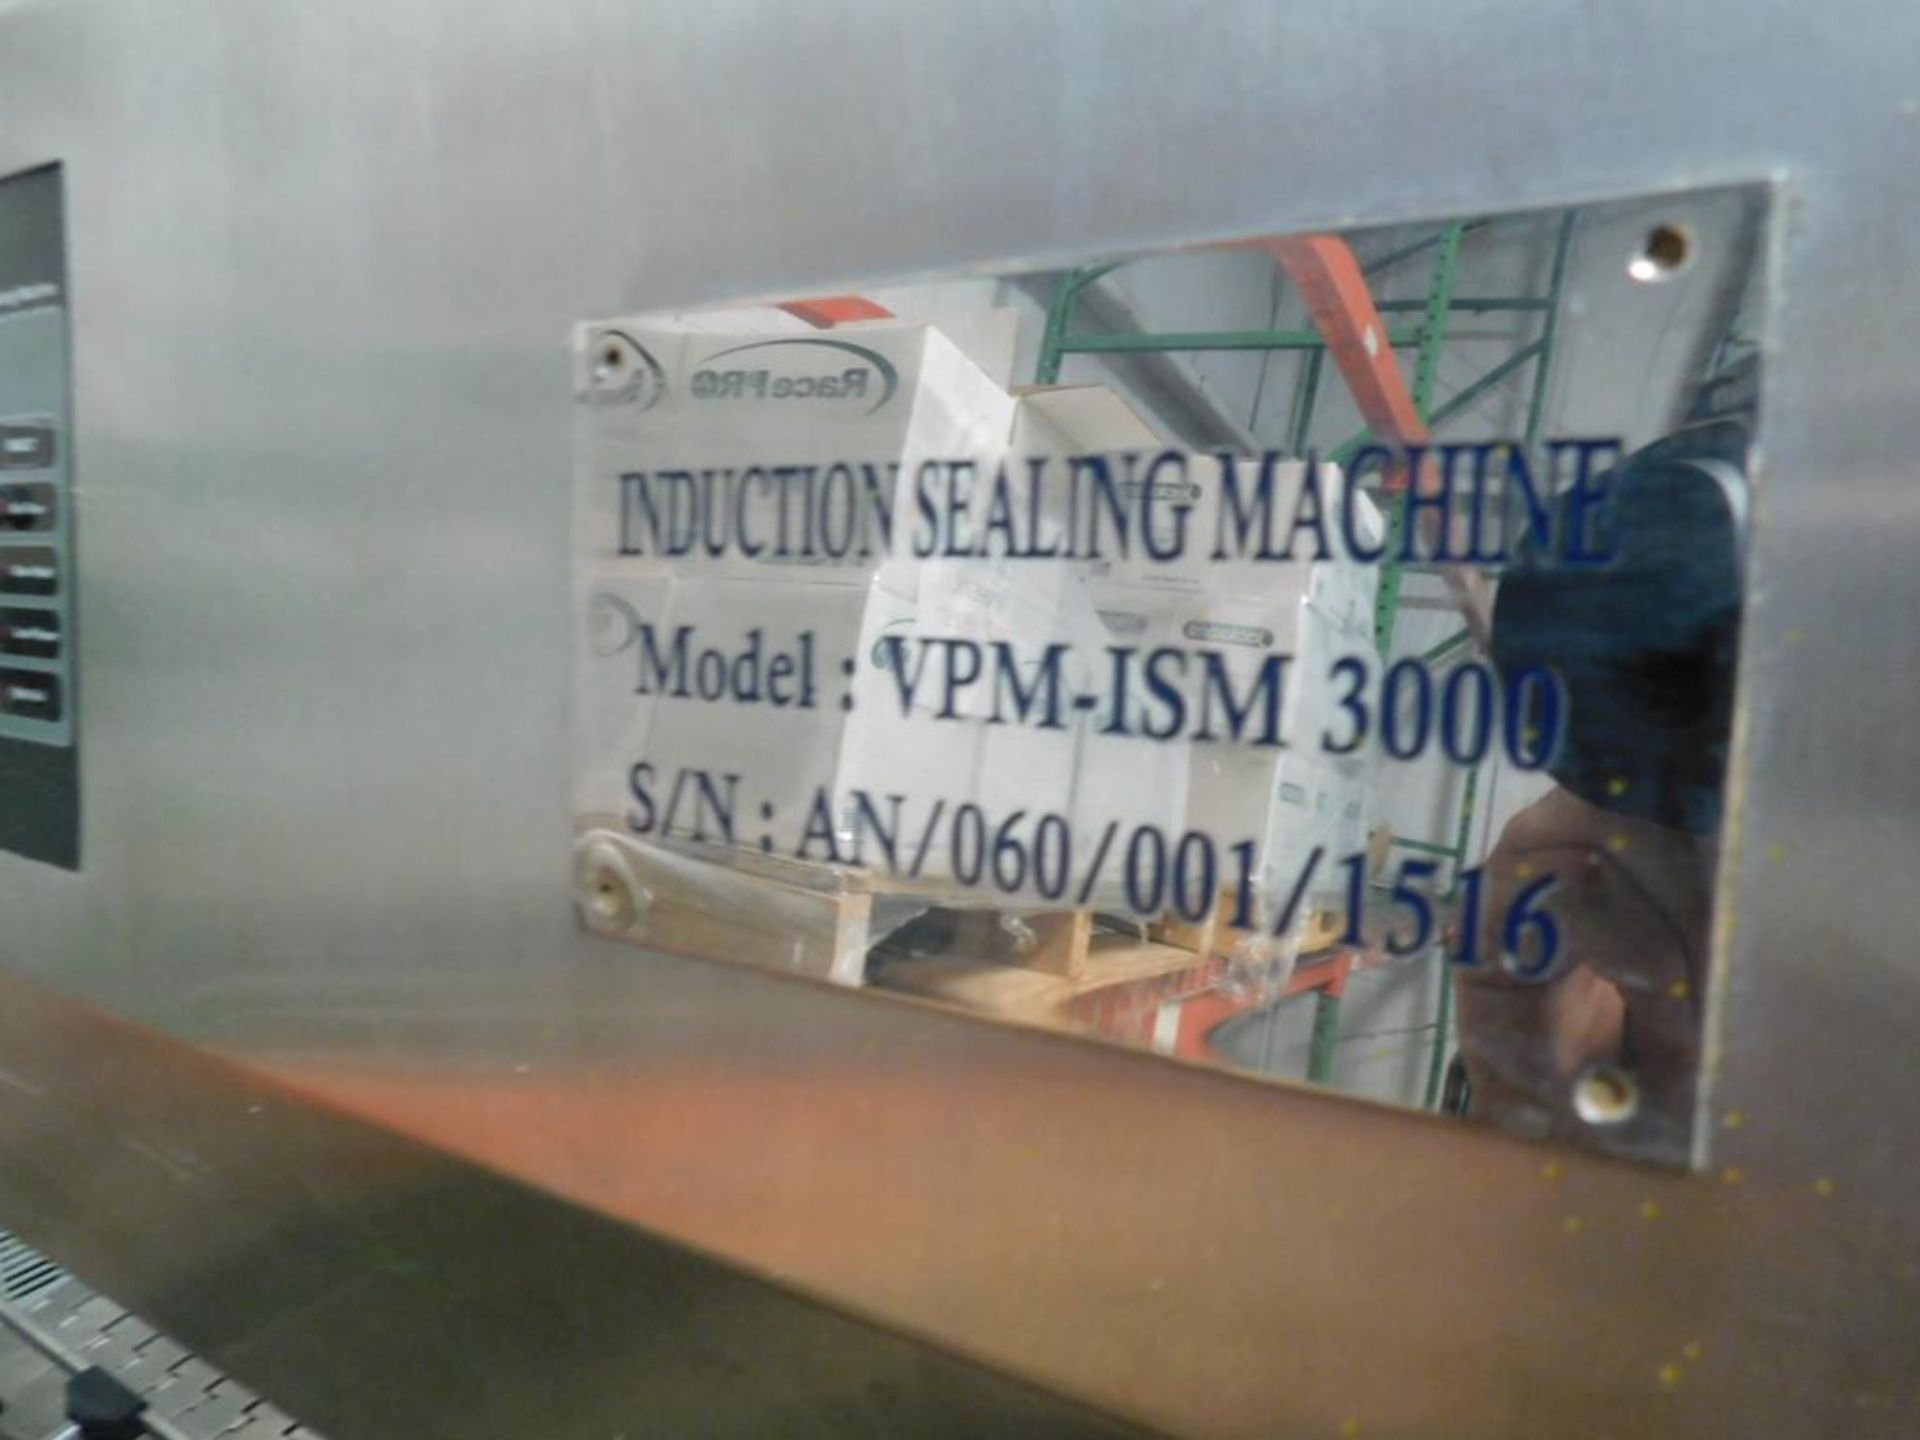 Induction Sealing Machine Model VPM-ISM 3000, S/N AN/060/001/1516 (Building 2) (LOCATED: 3201 S. ELM - Bild 5 aus 5